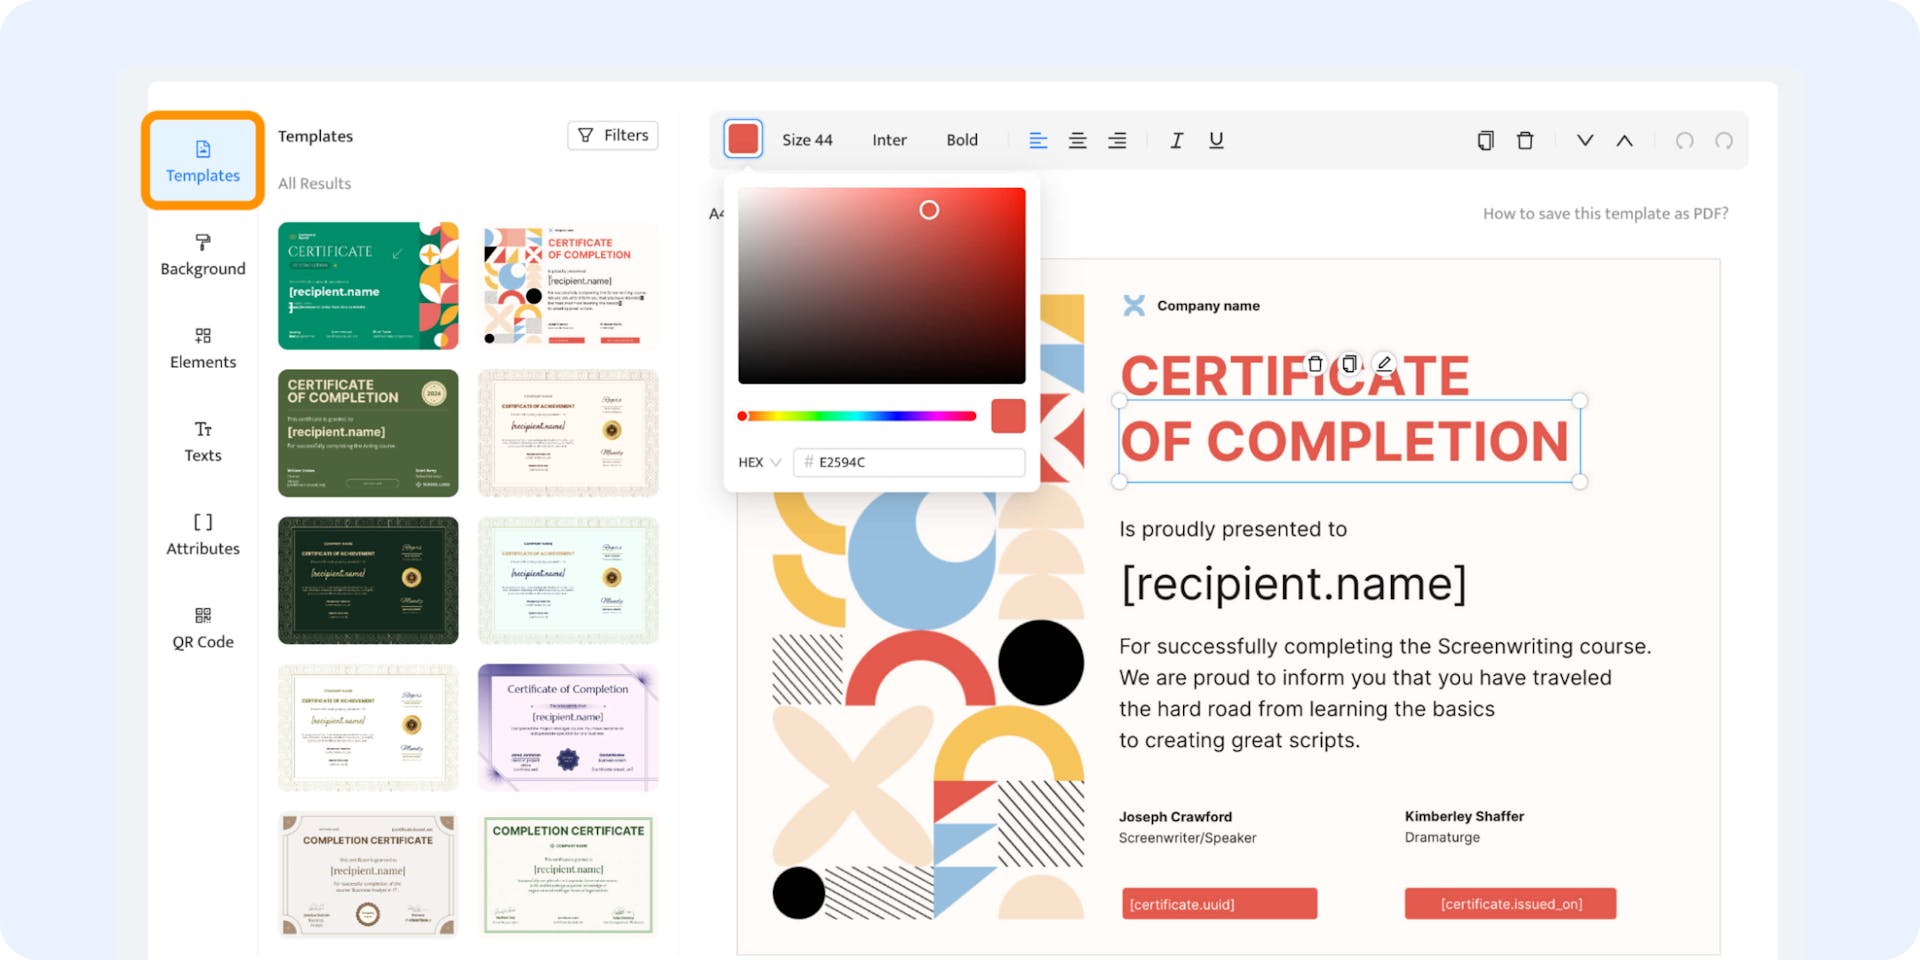 Choosing the certificate template that will recipients share on social media.